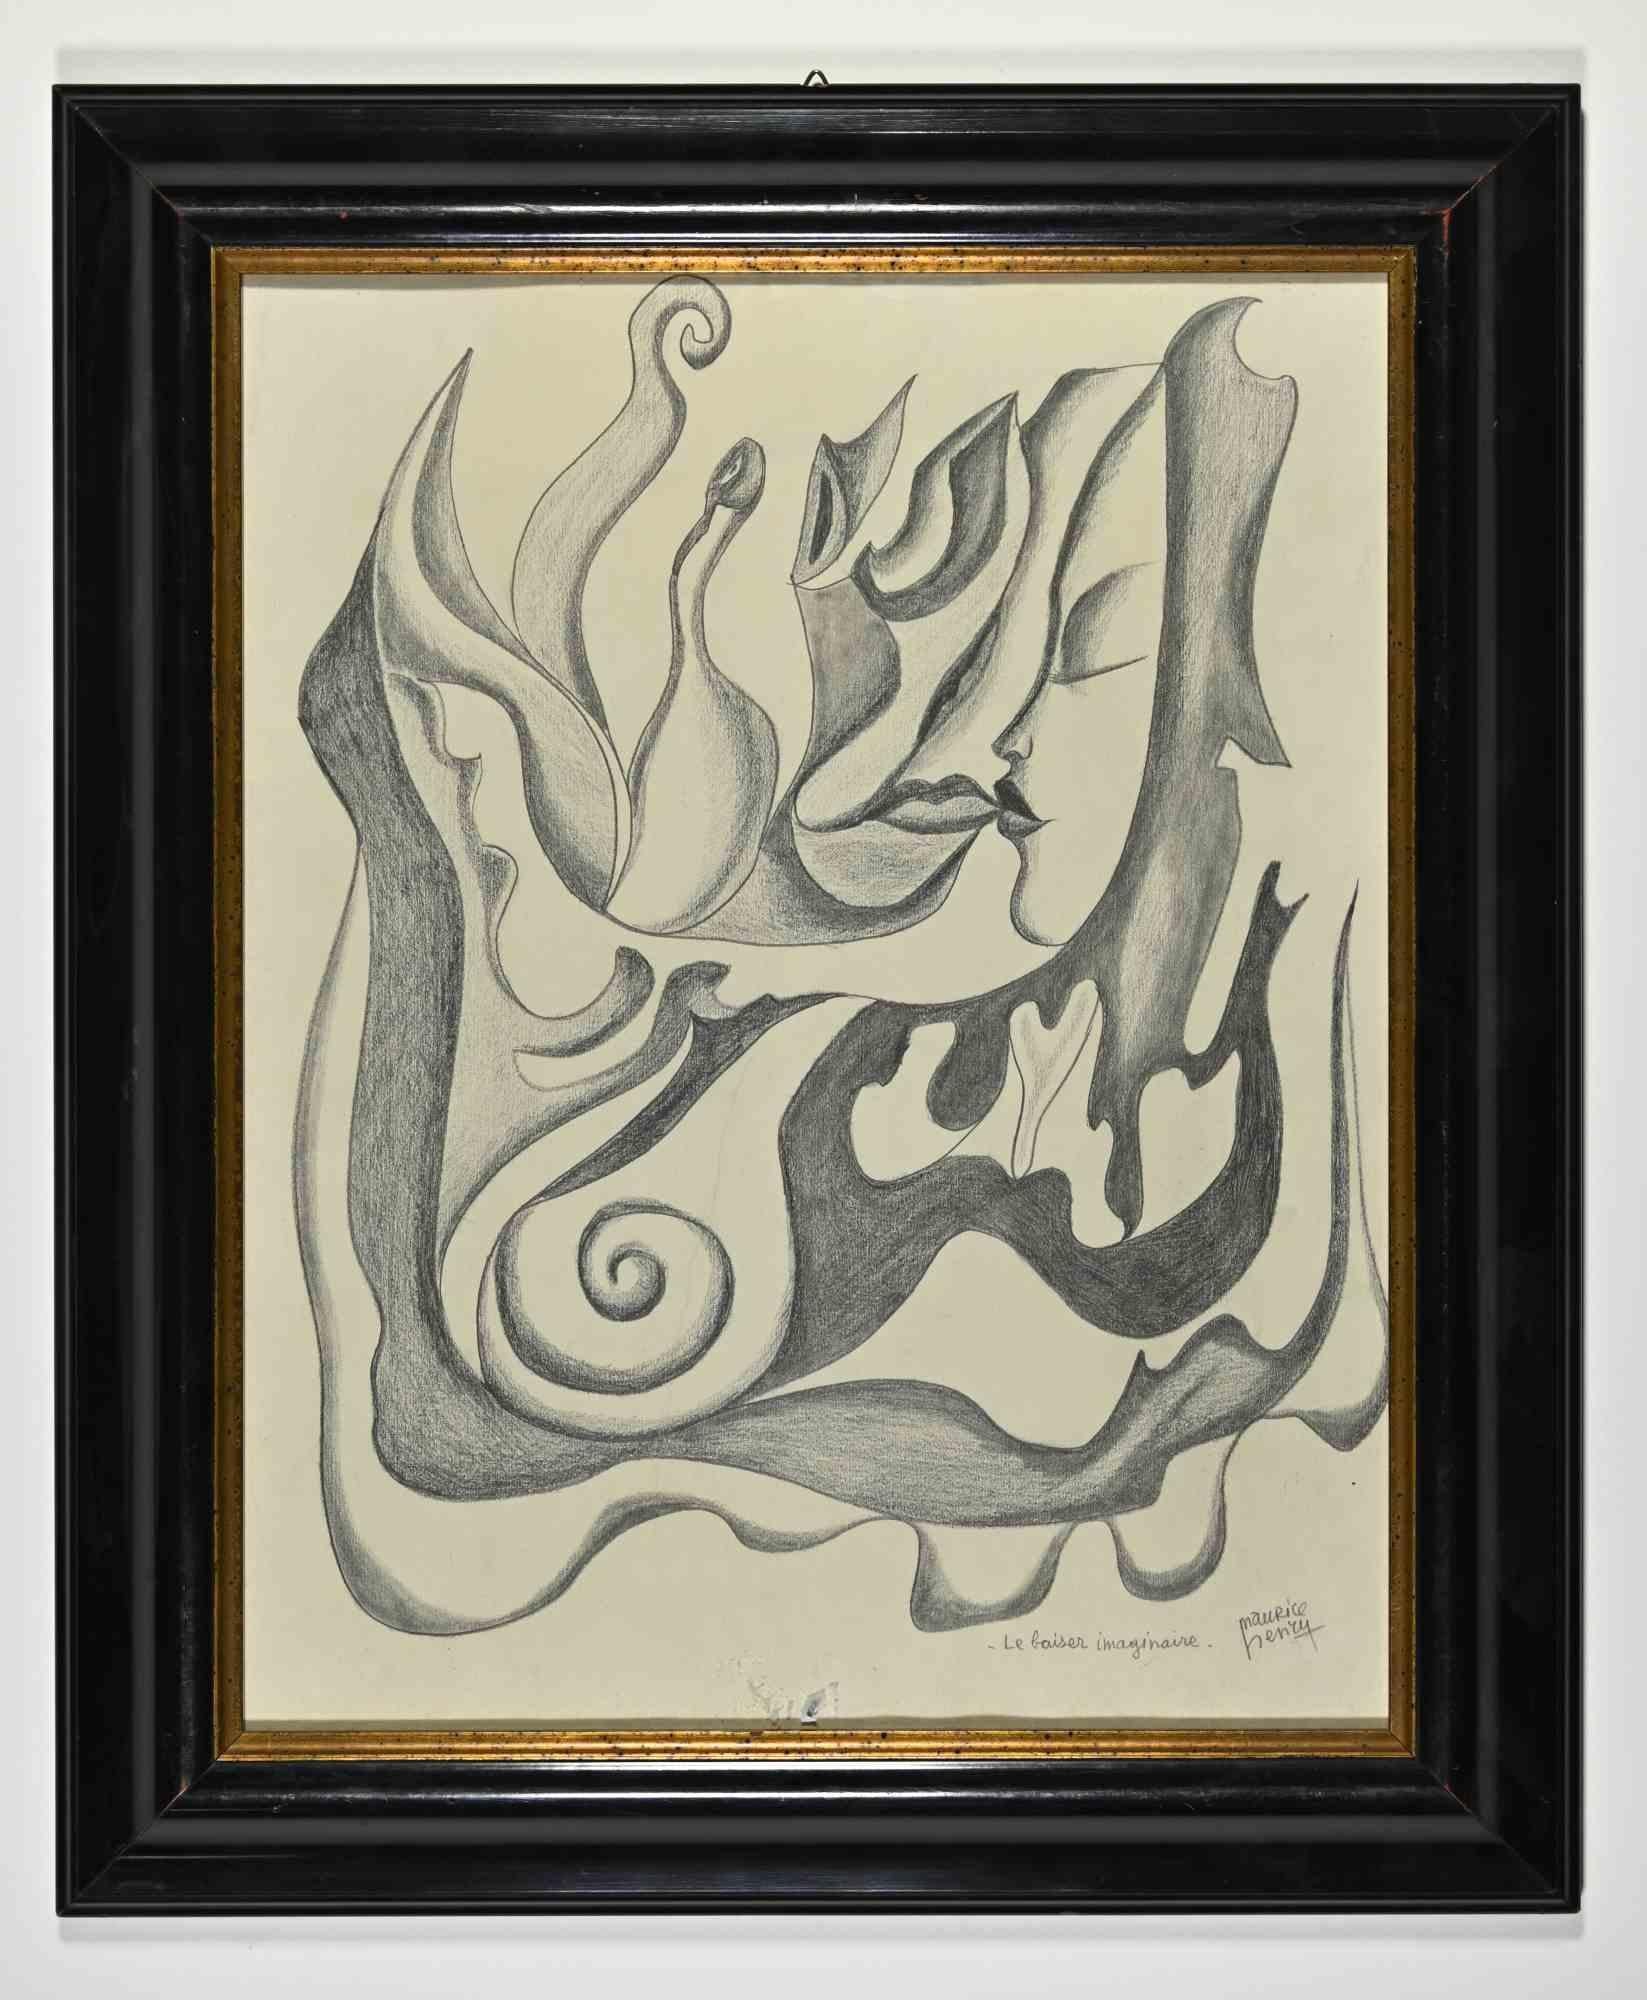 The imaginary kiss is a contemporary artwork realized by Maurice Henry.

Black and white pencil drawing.

Hand signed and titled on the lower margin.

Original title: Le baiser imaginaire

Includes frame